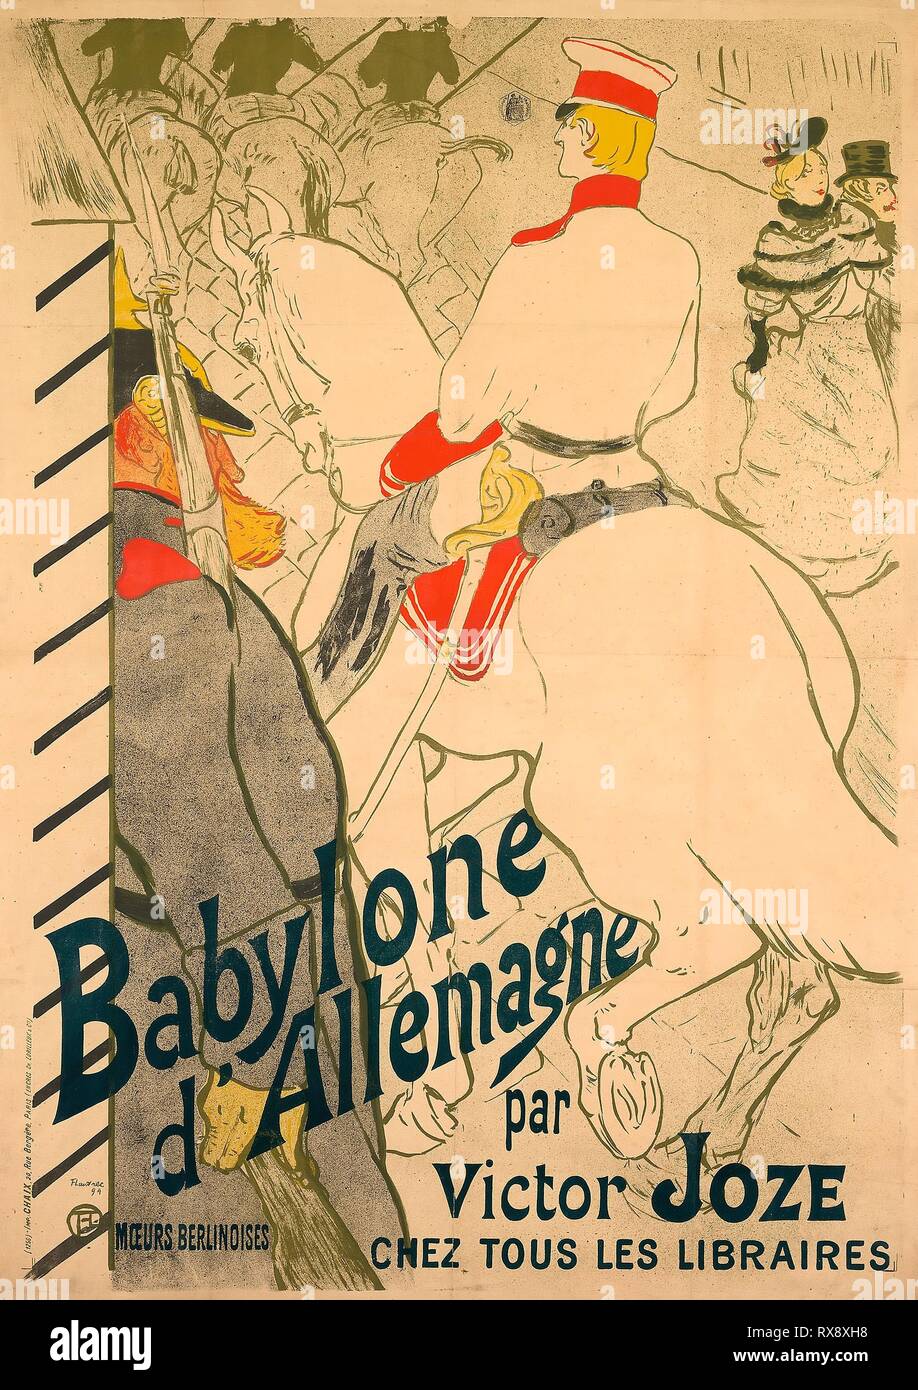 Babylone d'Allemagne. Henri de Toulouse-Lautrec; French, 1864-1901. Date: 1894. Dimensions: 1,190 × 820 mm (image); 1,225 × 875 mm (sheet, sight). Color lithograph on tan wove paper. Origin: France. Museum: The Chicago Art Institute. Stock Photo